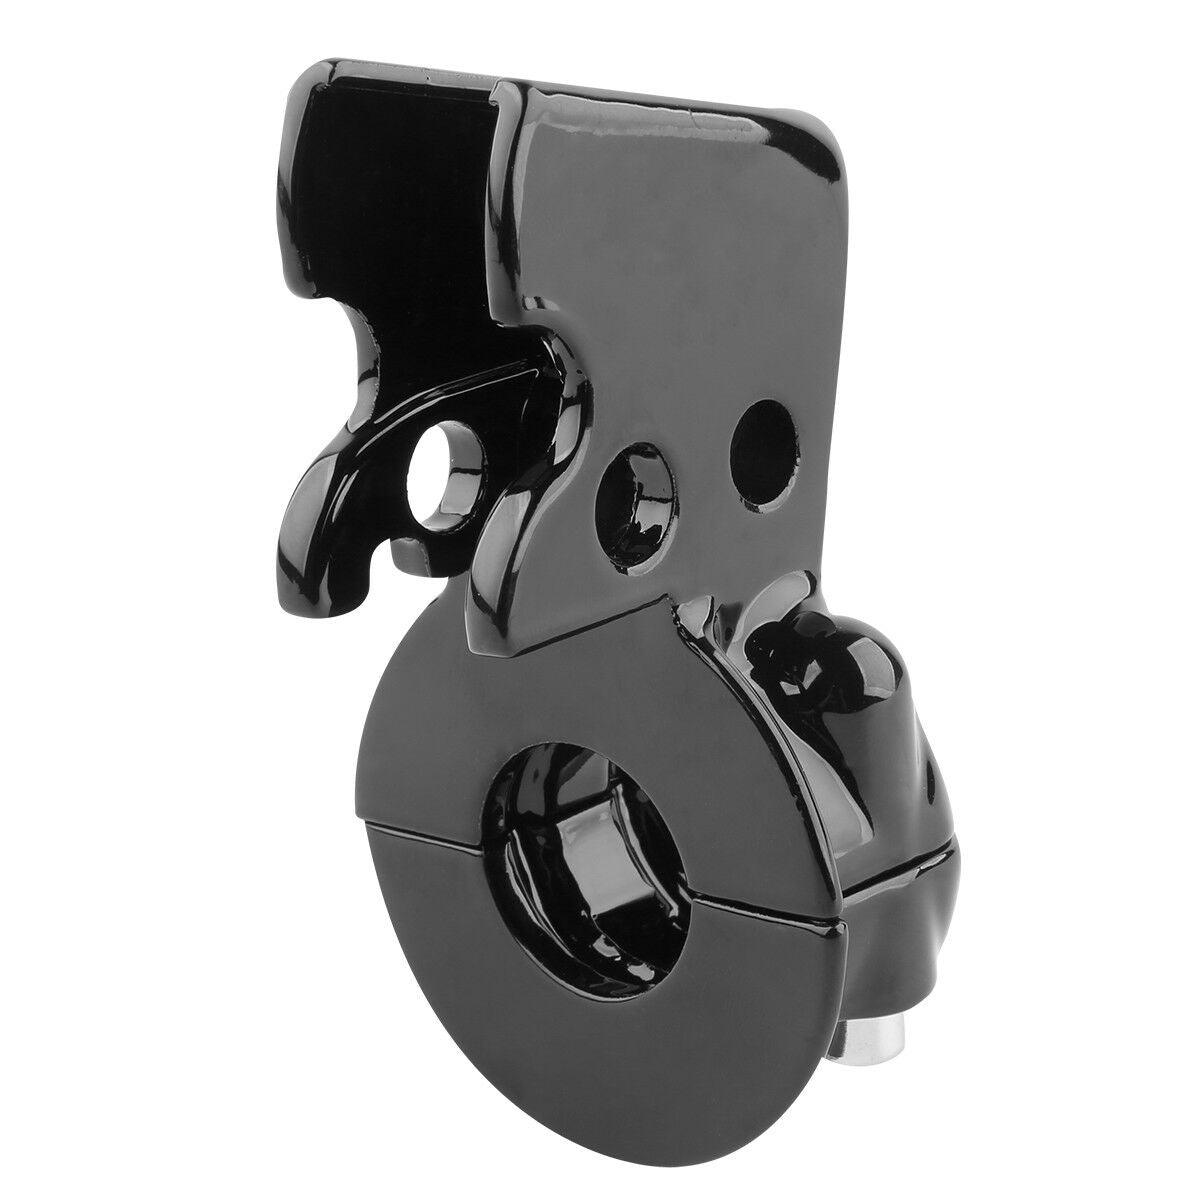 Clutch Lever Perch Clamp Fit For Harley Touring Sportster 1200 883 Custom - Moto Life Products